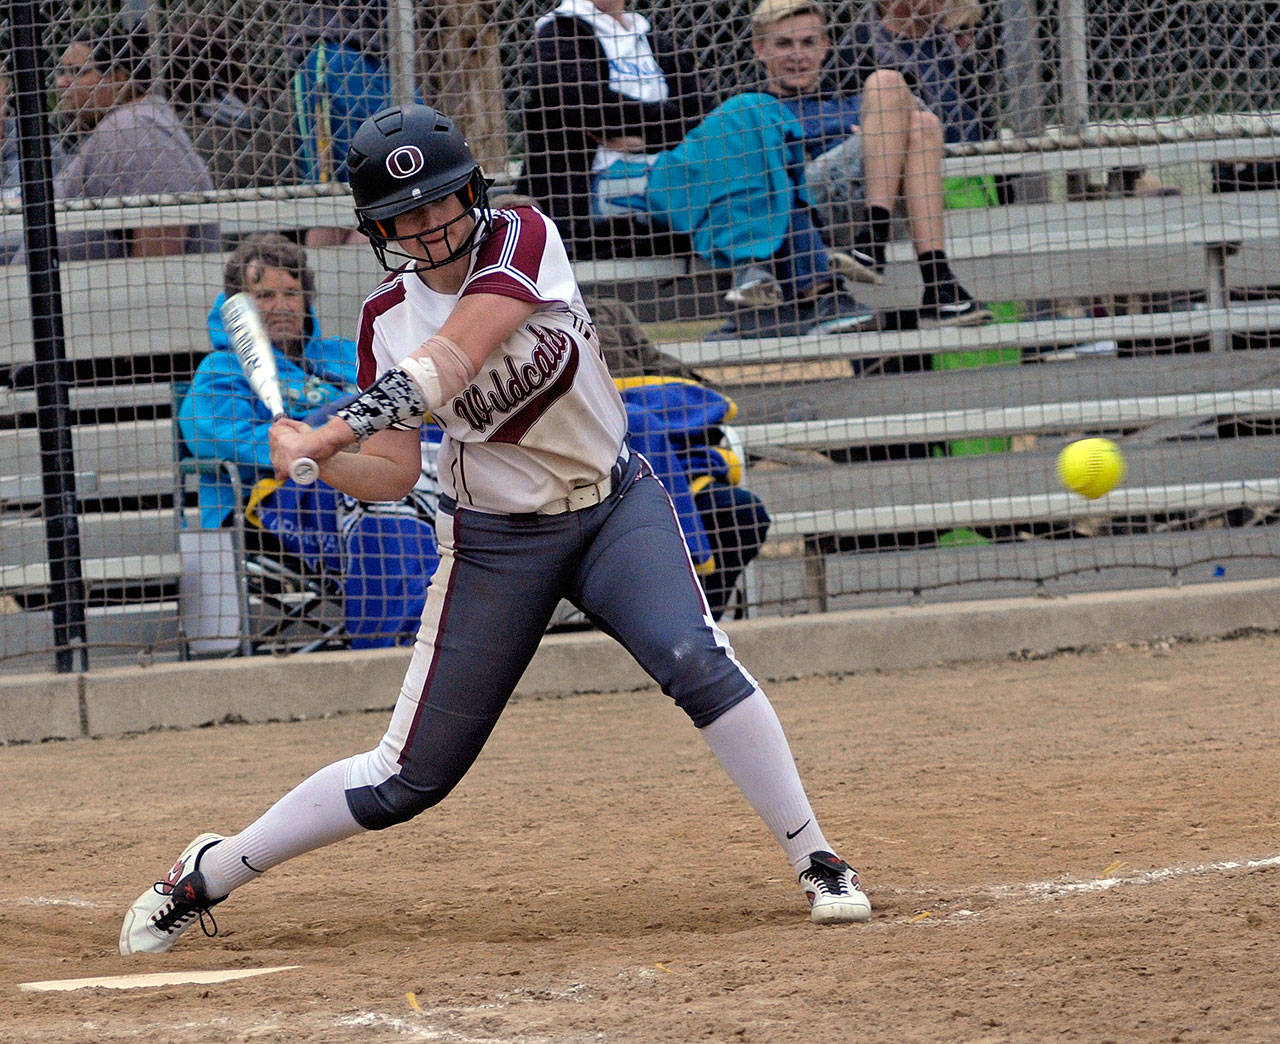 Softball State Championship Preview: Title hunt begins this weekend for local teams